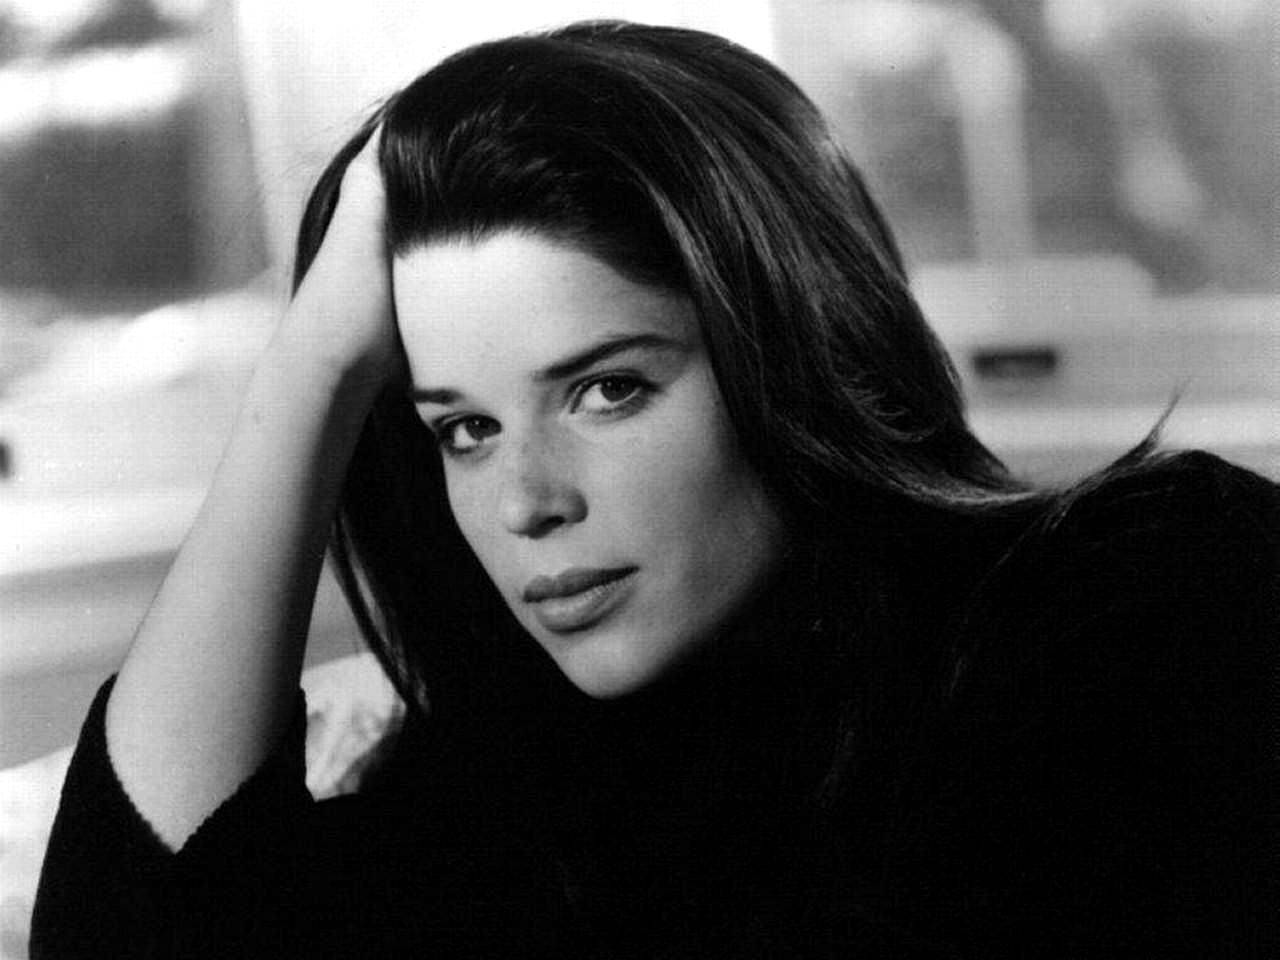 Hand On The Head Neve Campbell Wallpaper